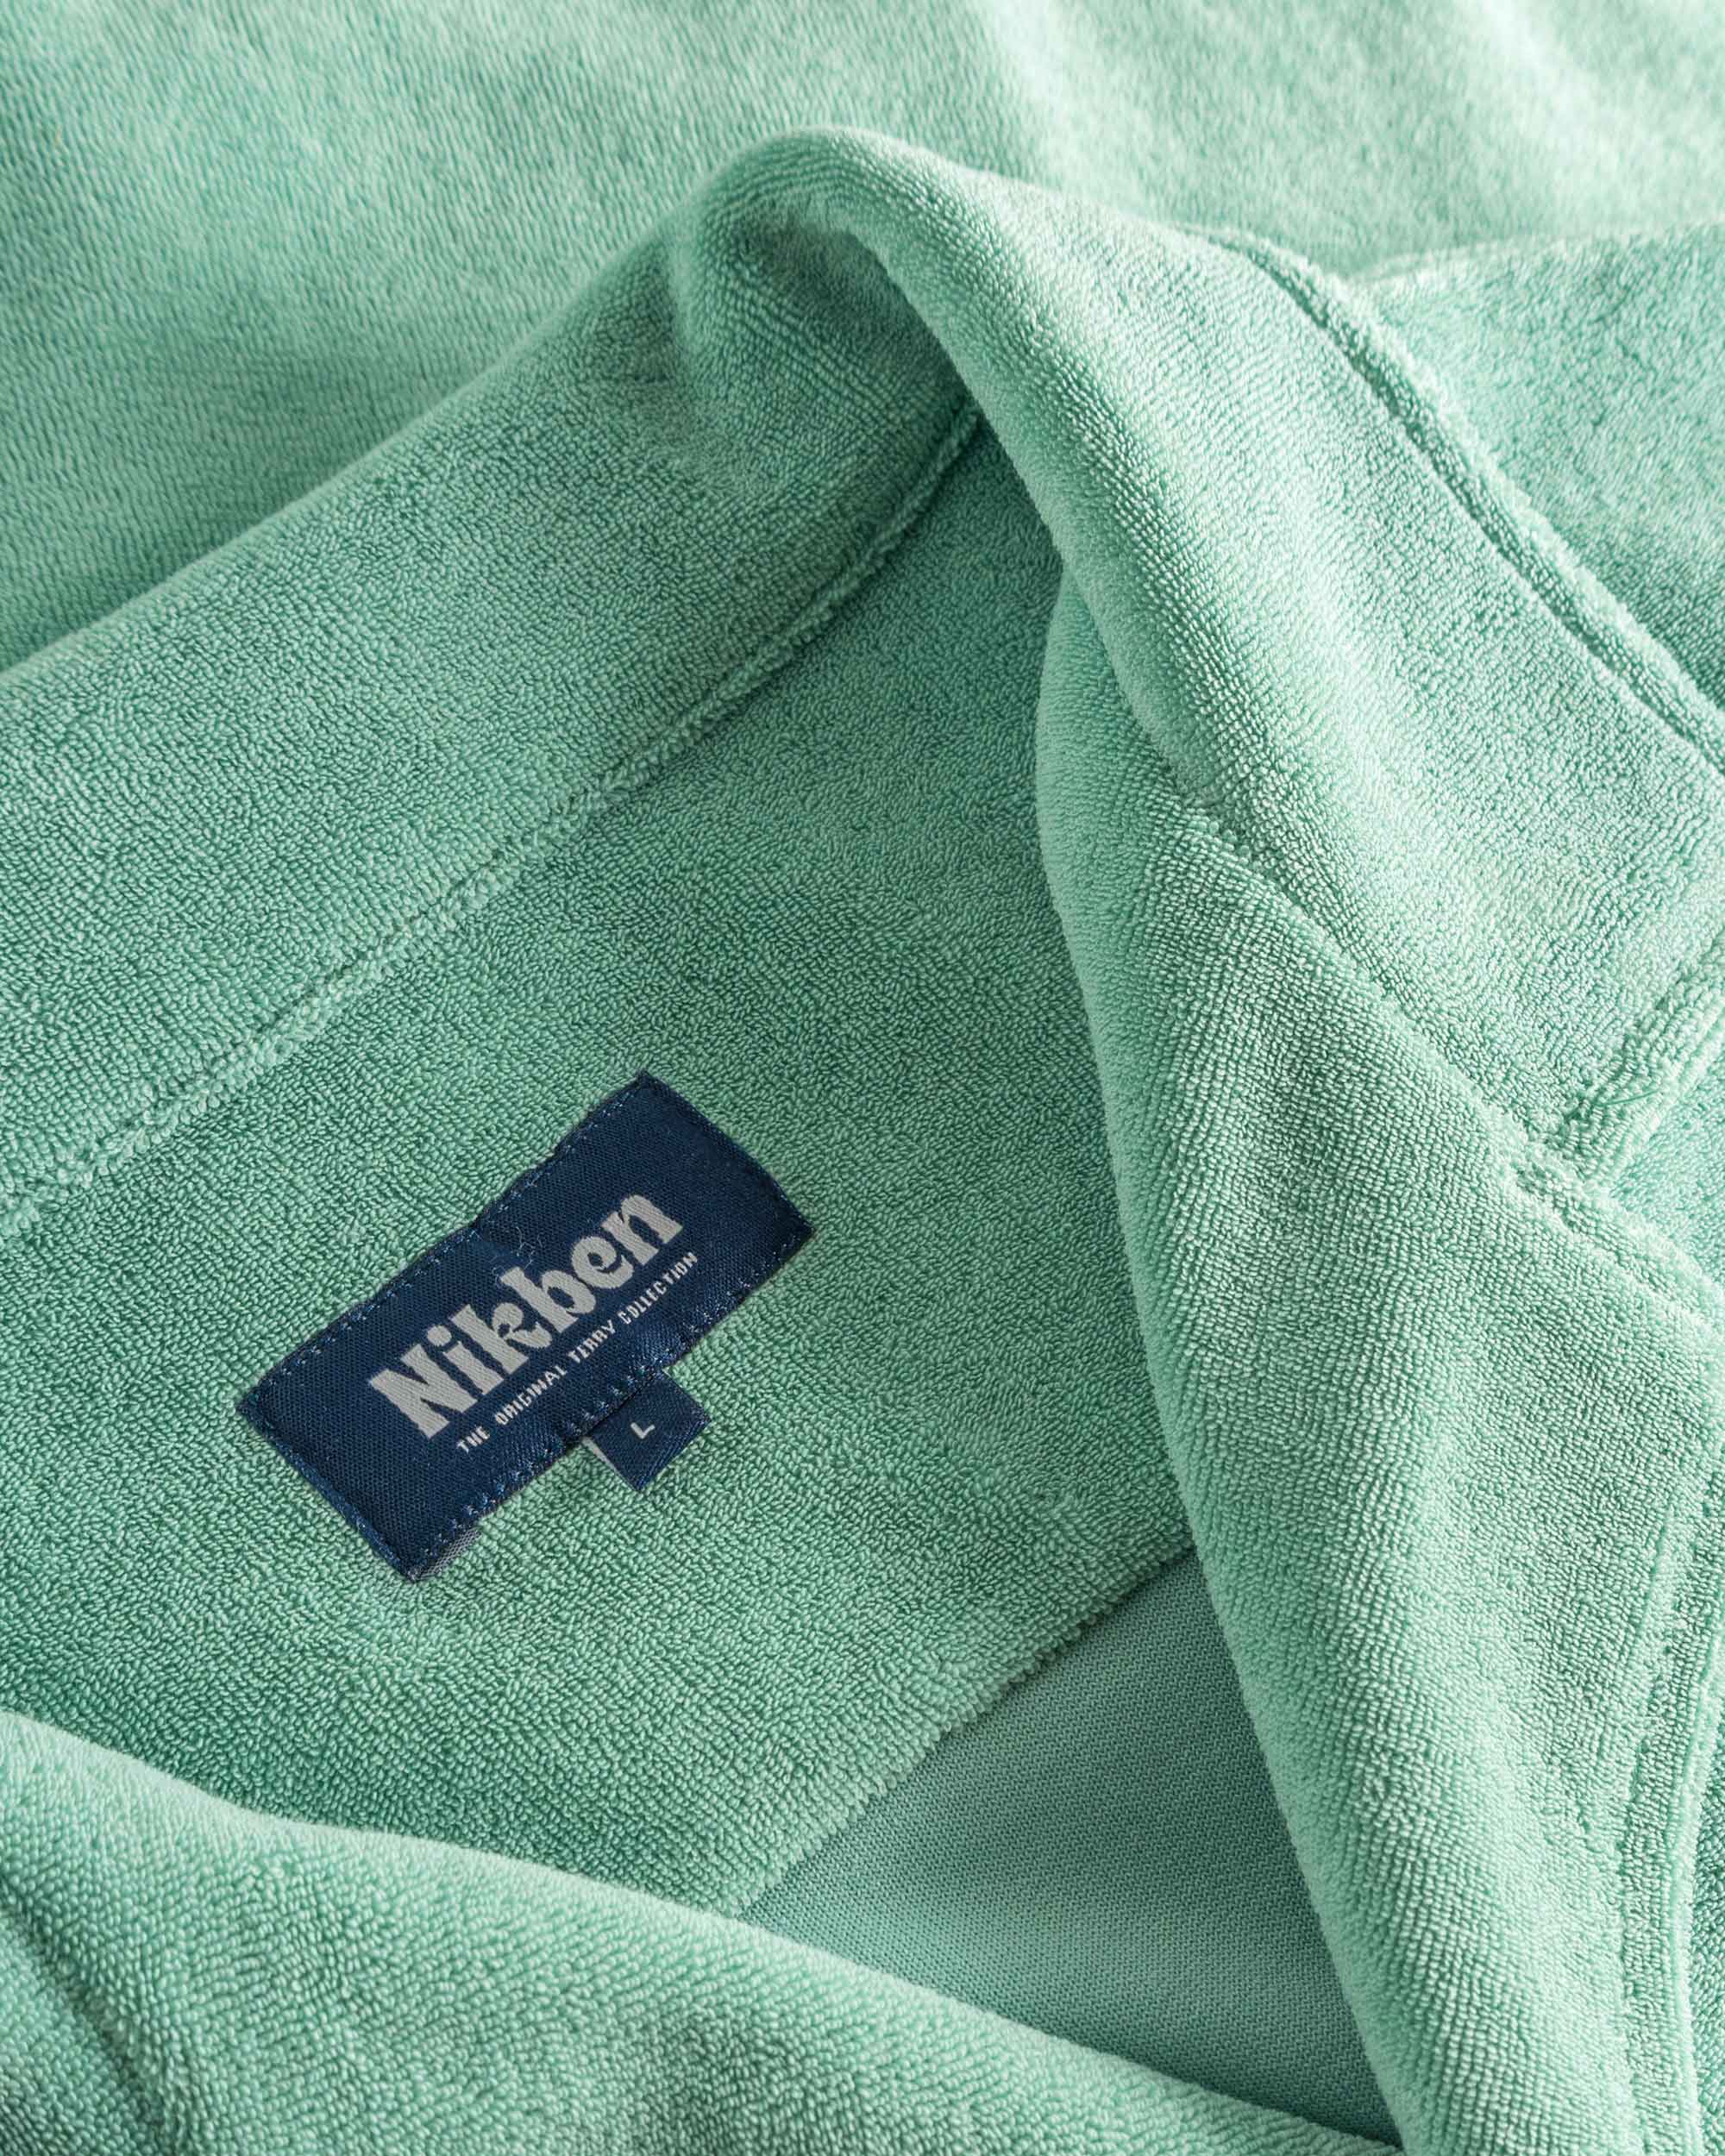 Close up of open collar and tag on a grey-green short sleeve shirt